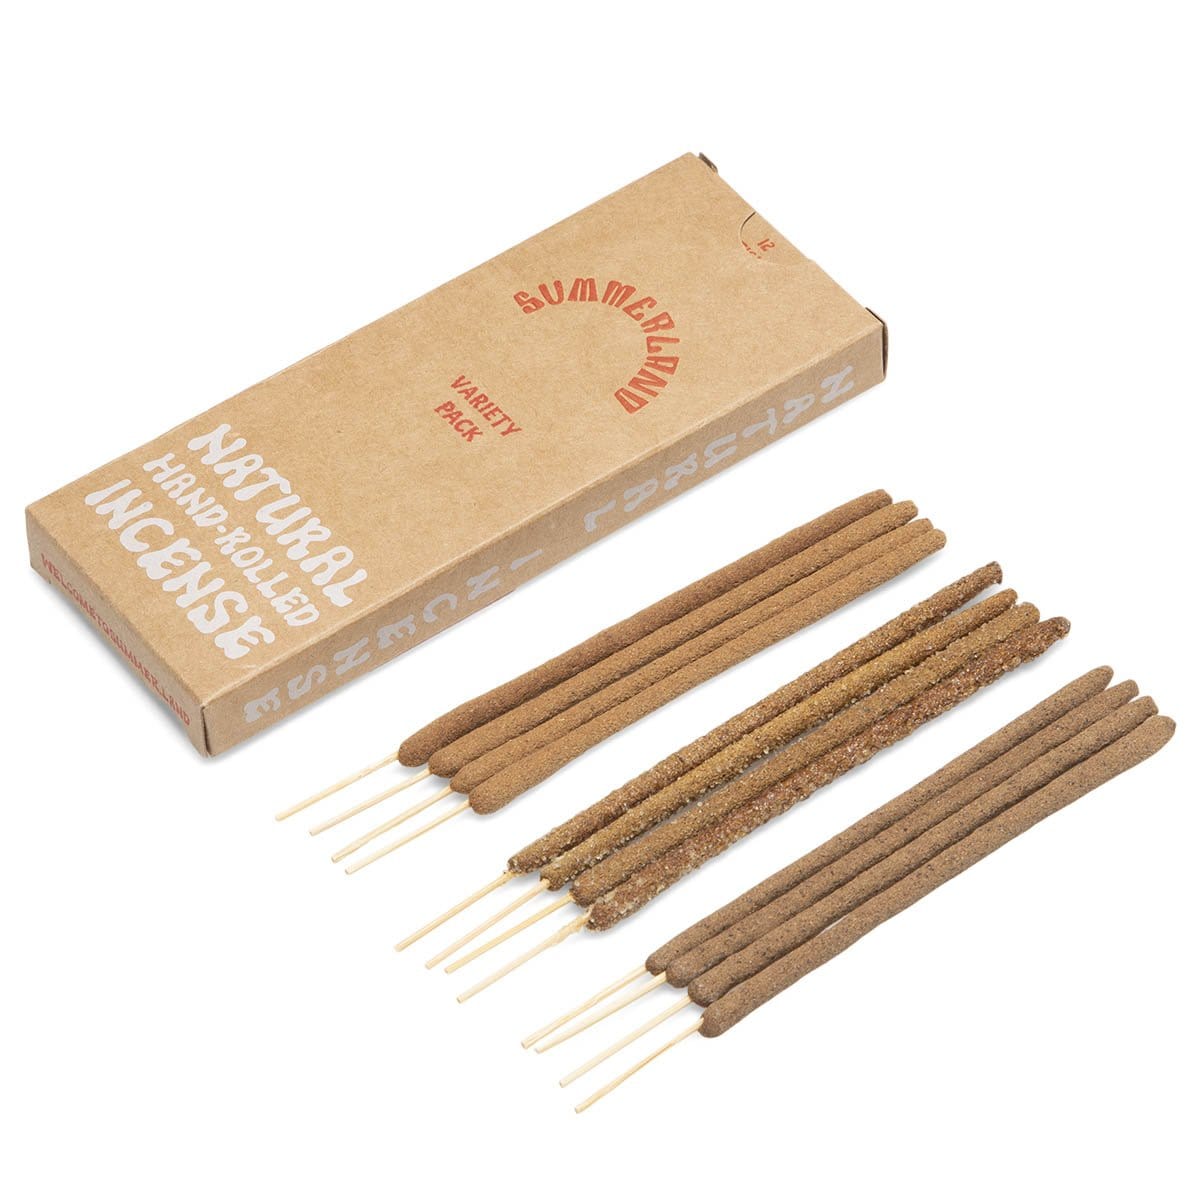 Summerland Ceramics Bags & Accessories VARIETY PACK / O/S NATURAL INCENSE VARIETY PACK